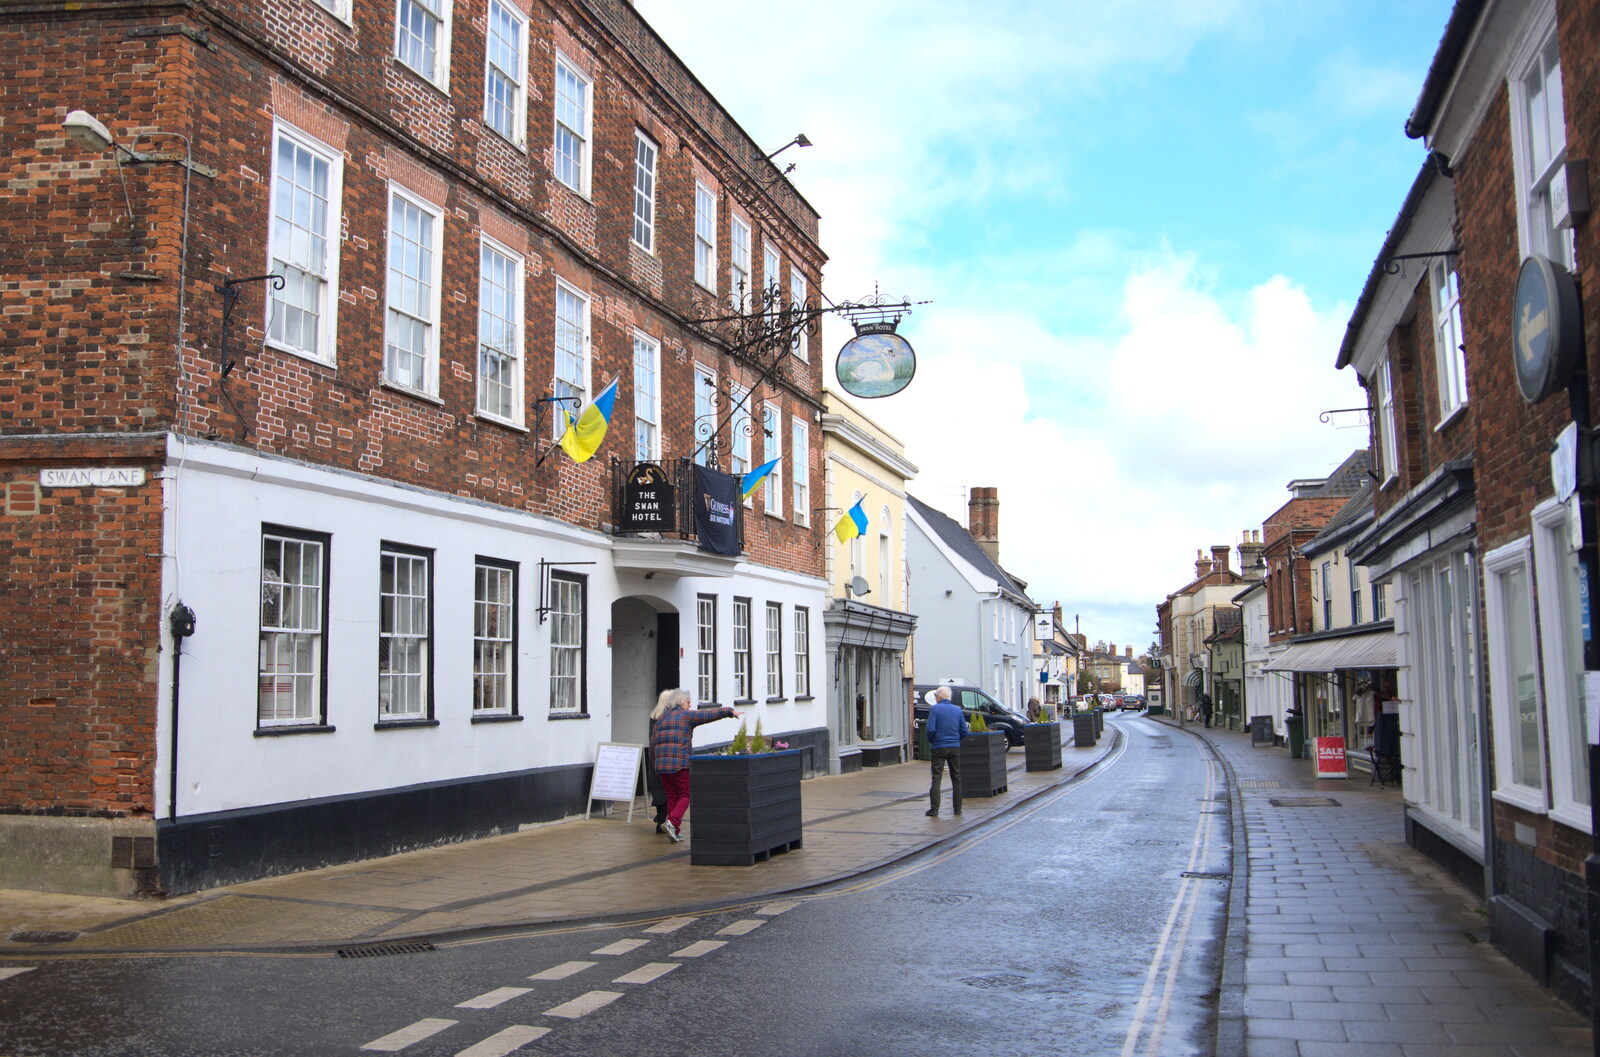 Lunch in Harleston, Norfolk - 1st March 2023: Another view of the Swan Hotel